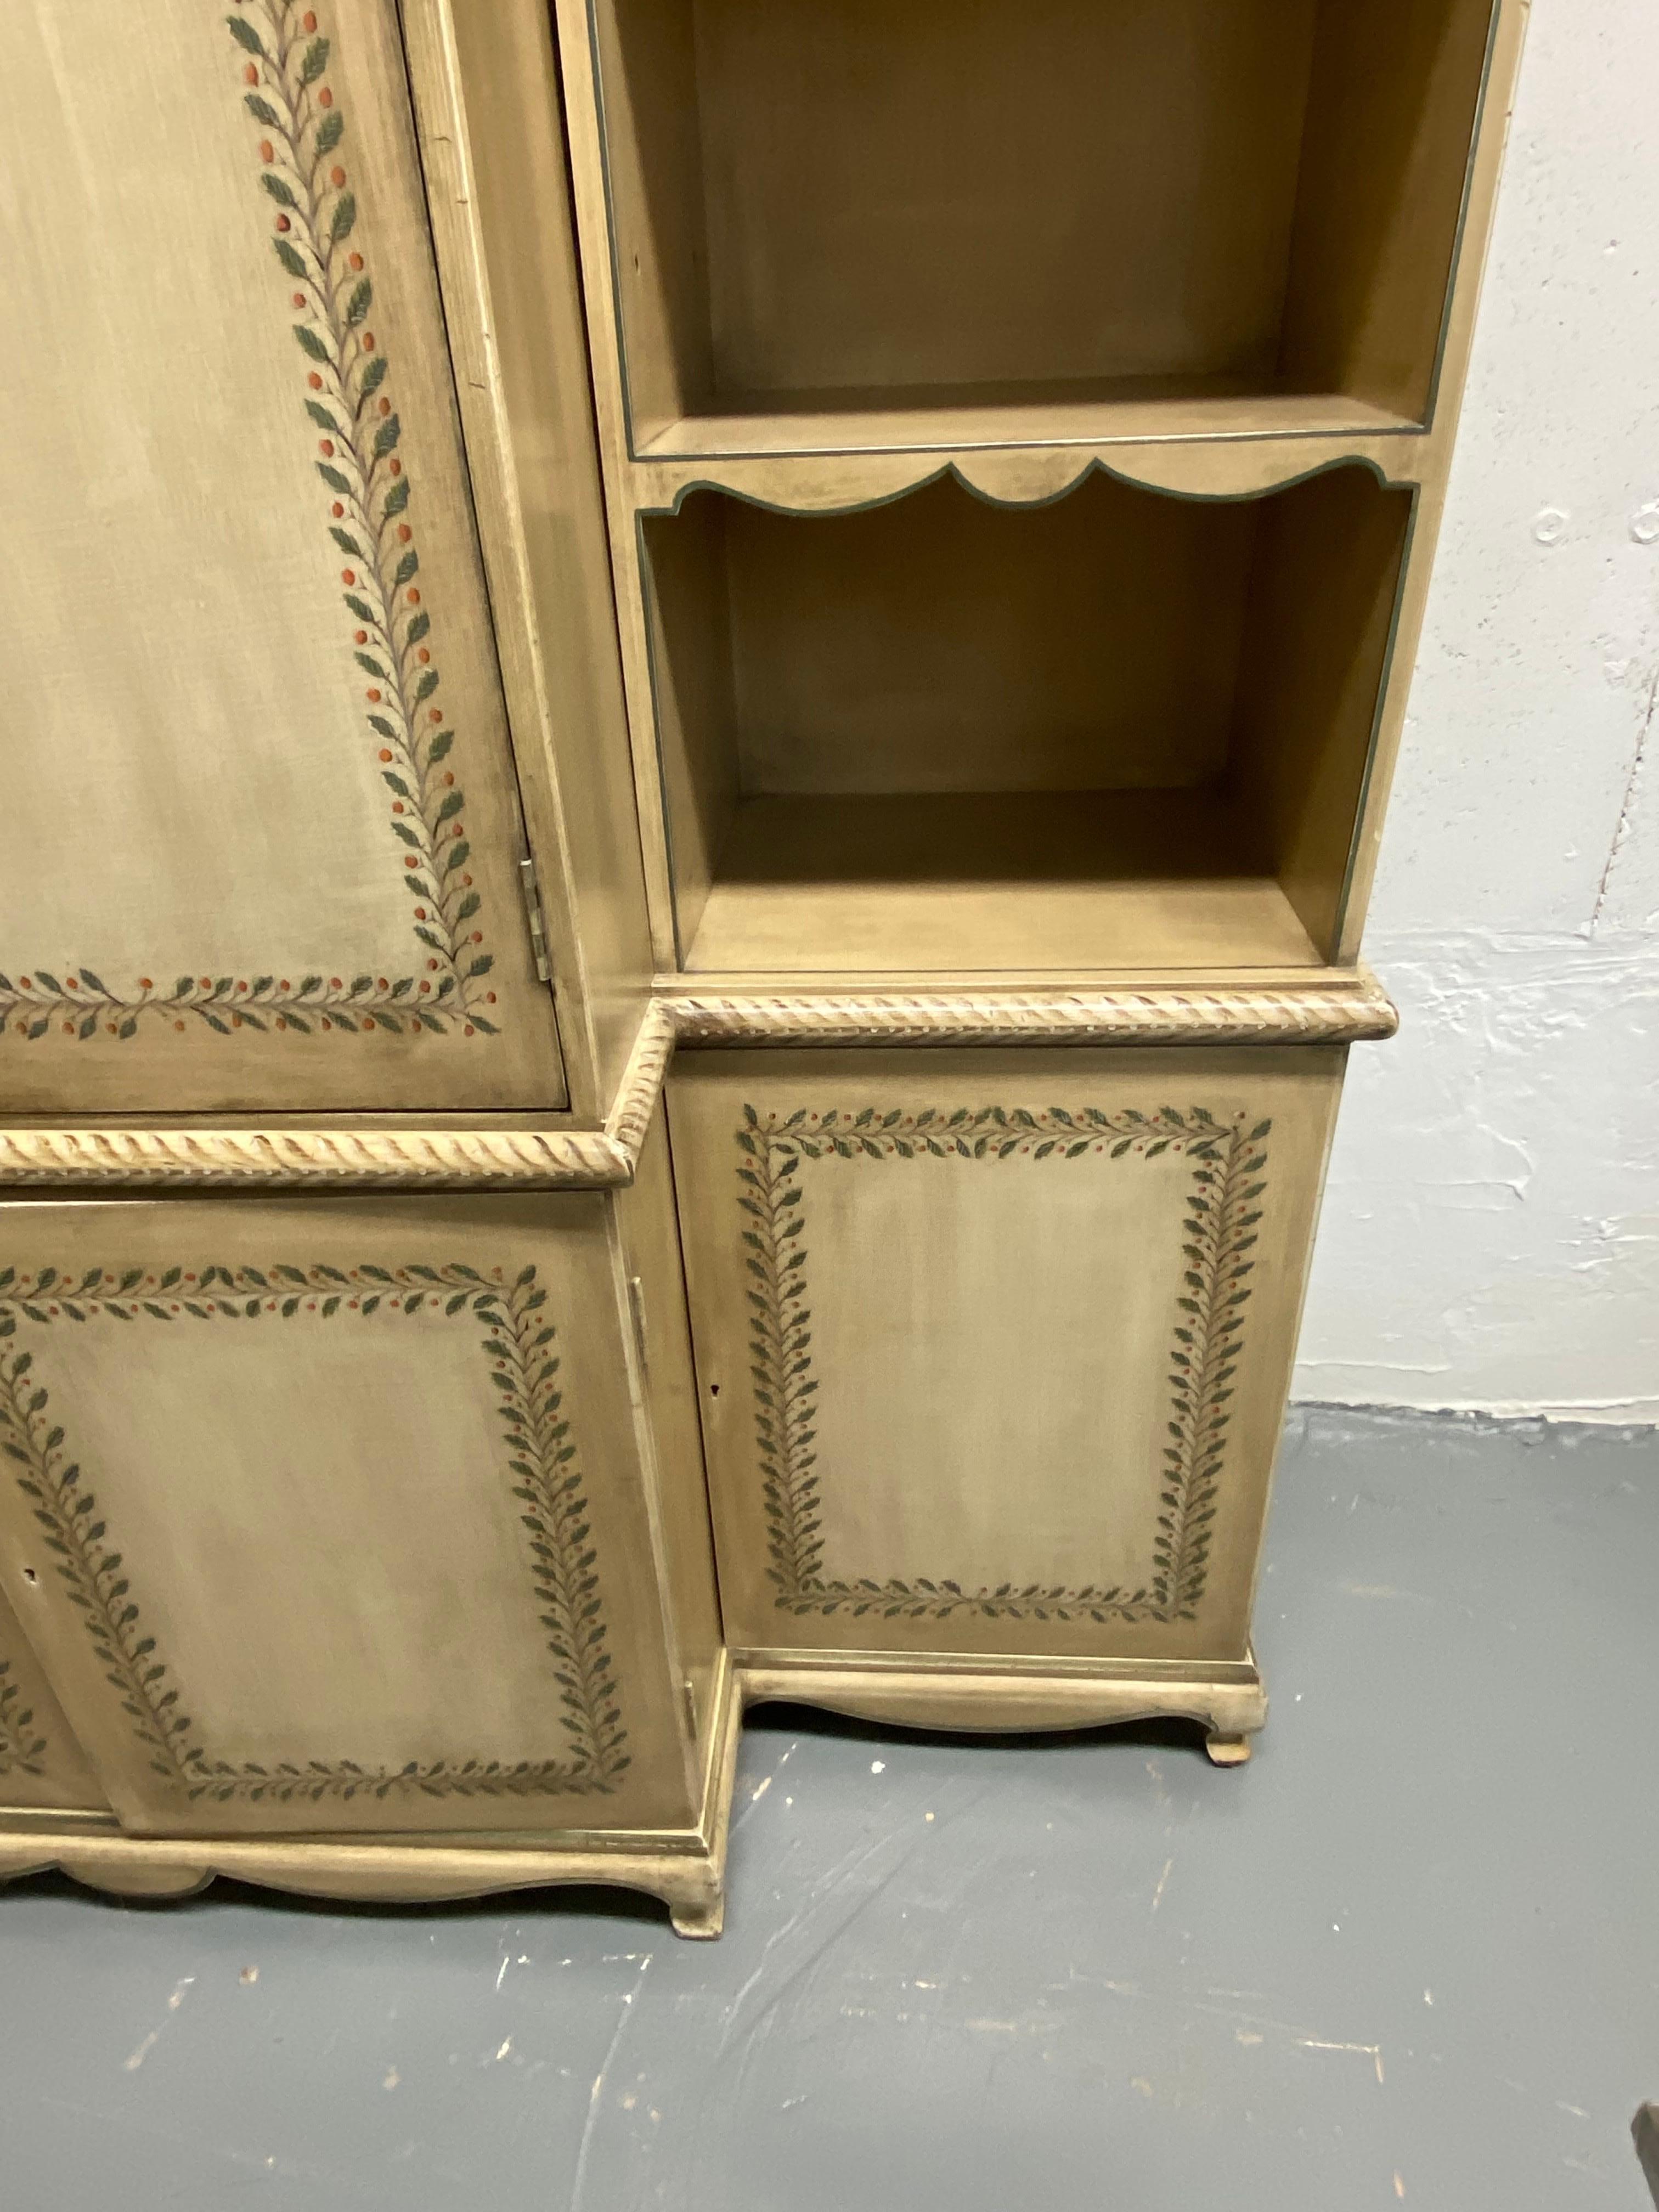 Wood Custom Made & Painted French Provincial Style Cabinet in Painted Leaf Design For Sale